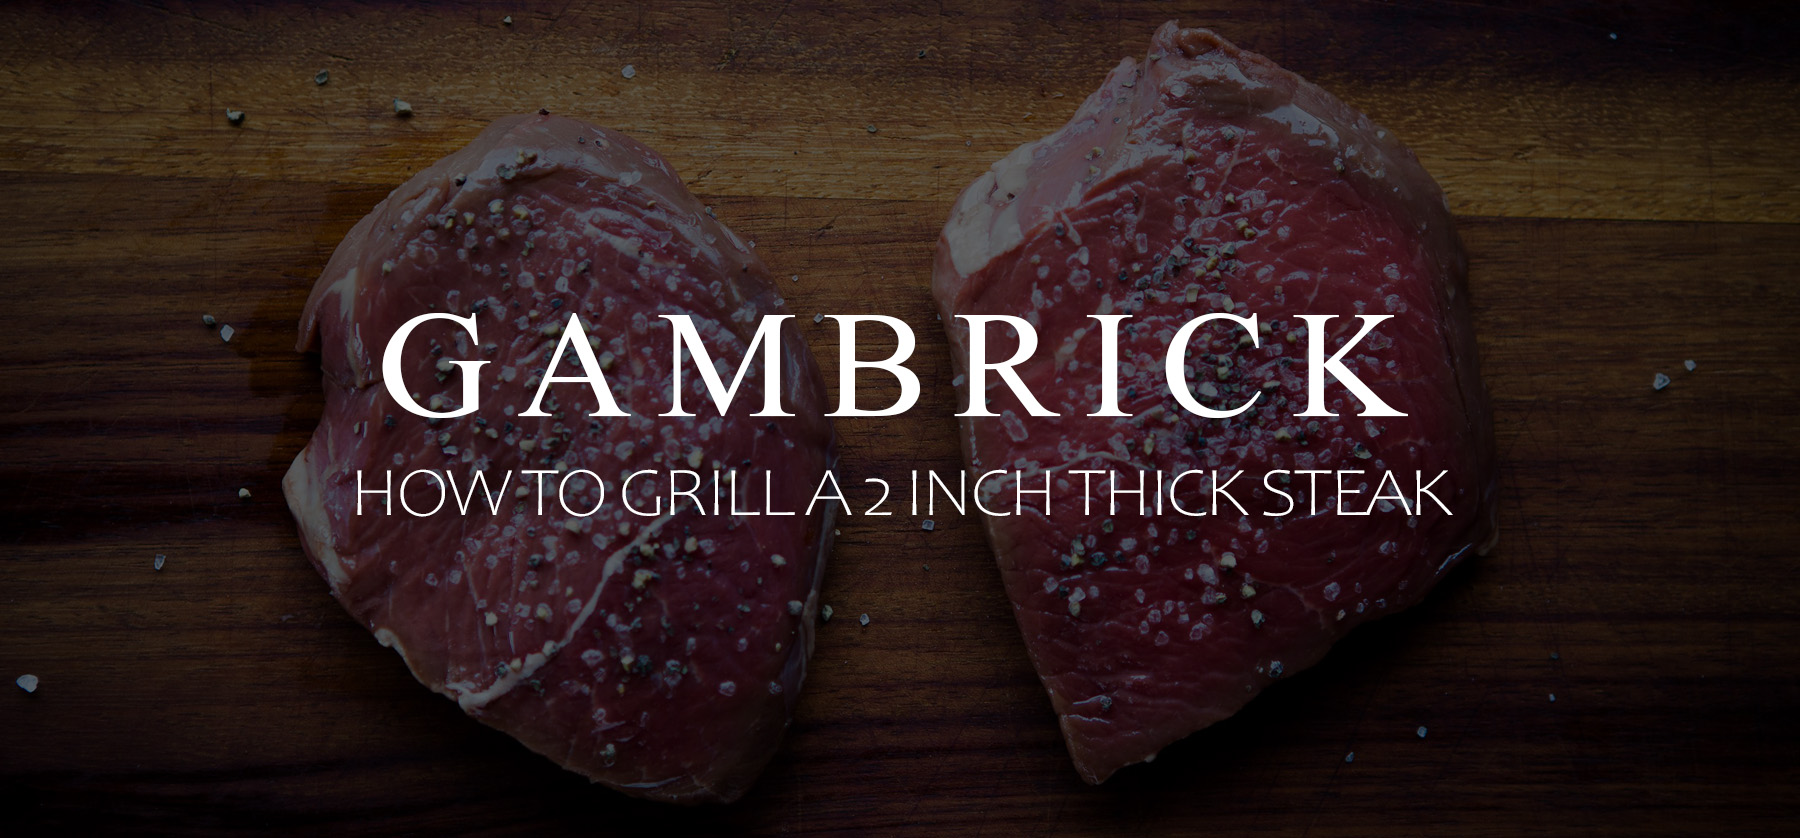 how to grill a 2 inch thick steak banner 